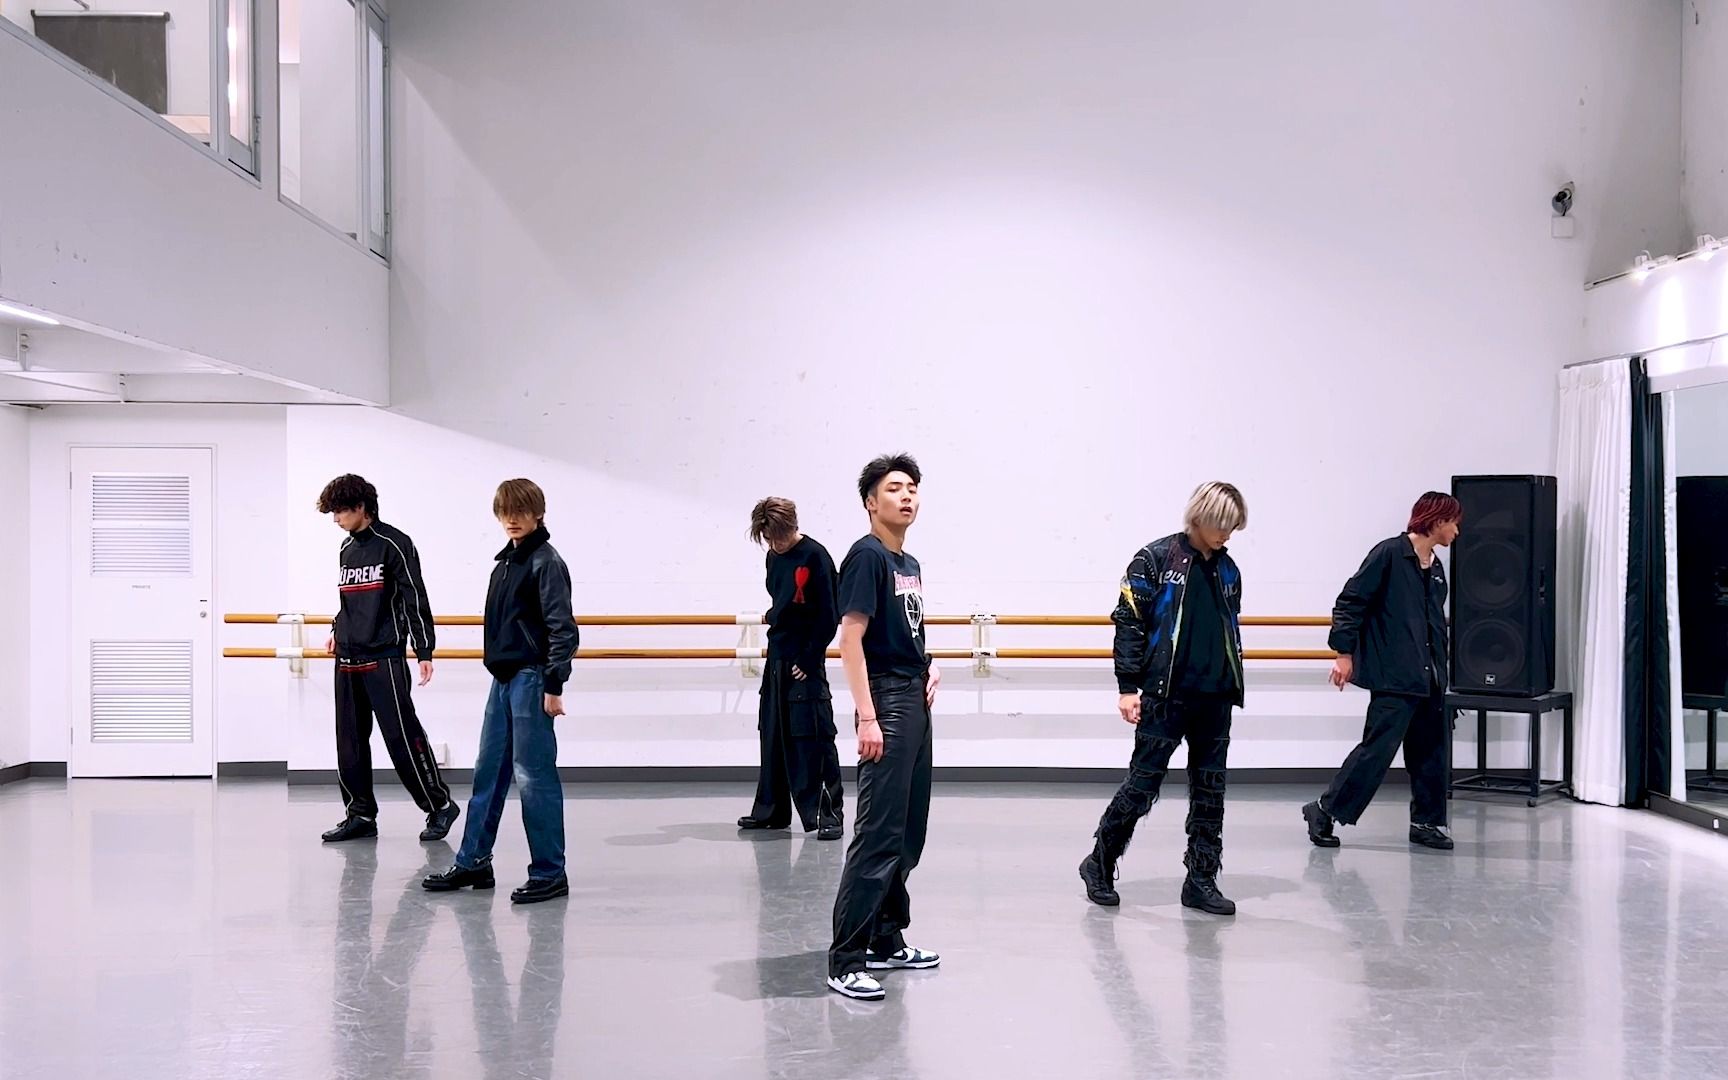 【WATWING】 “The Practice of Love” CHOREOGRAPHY